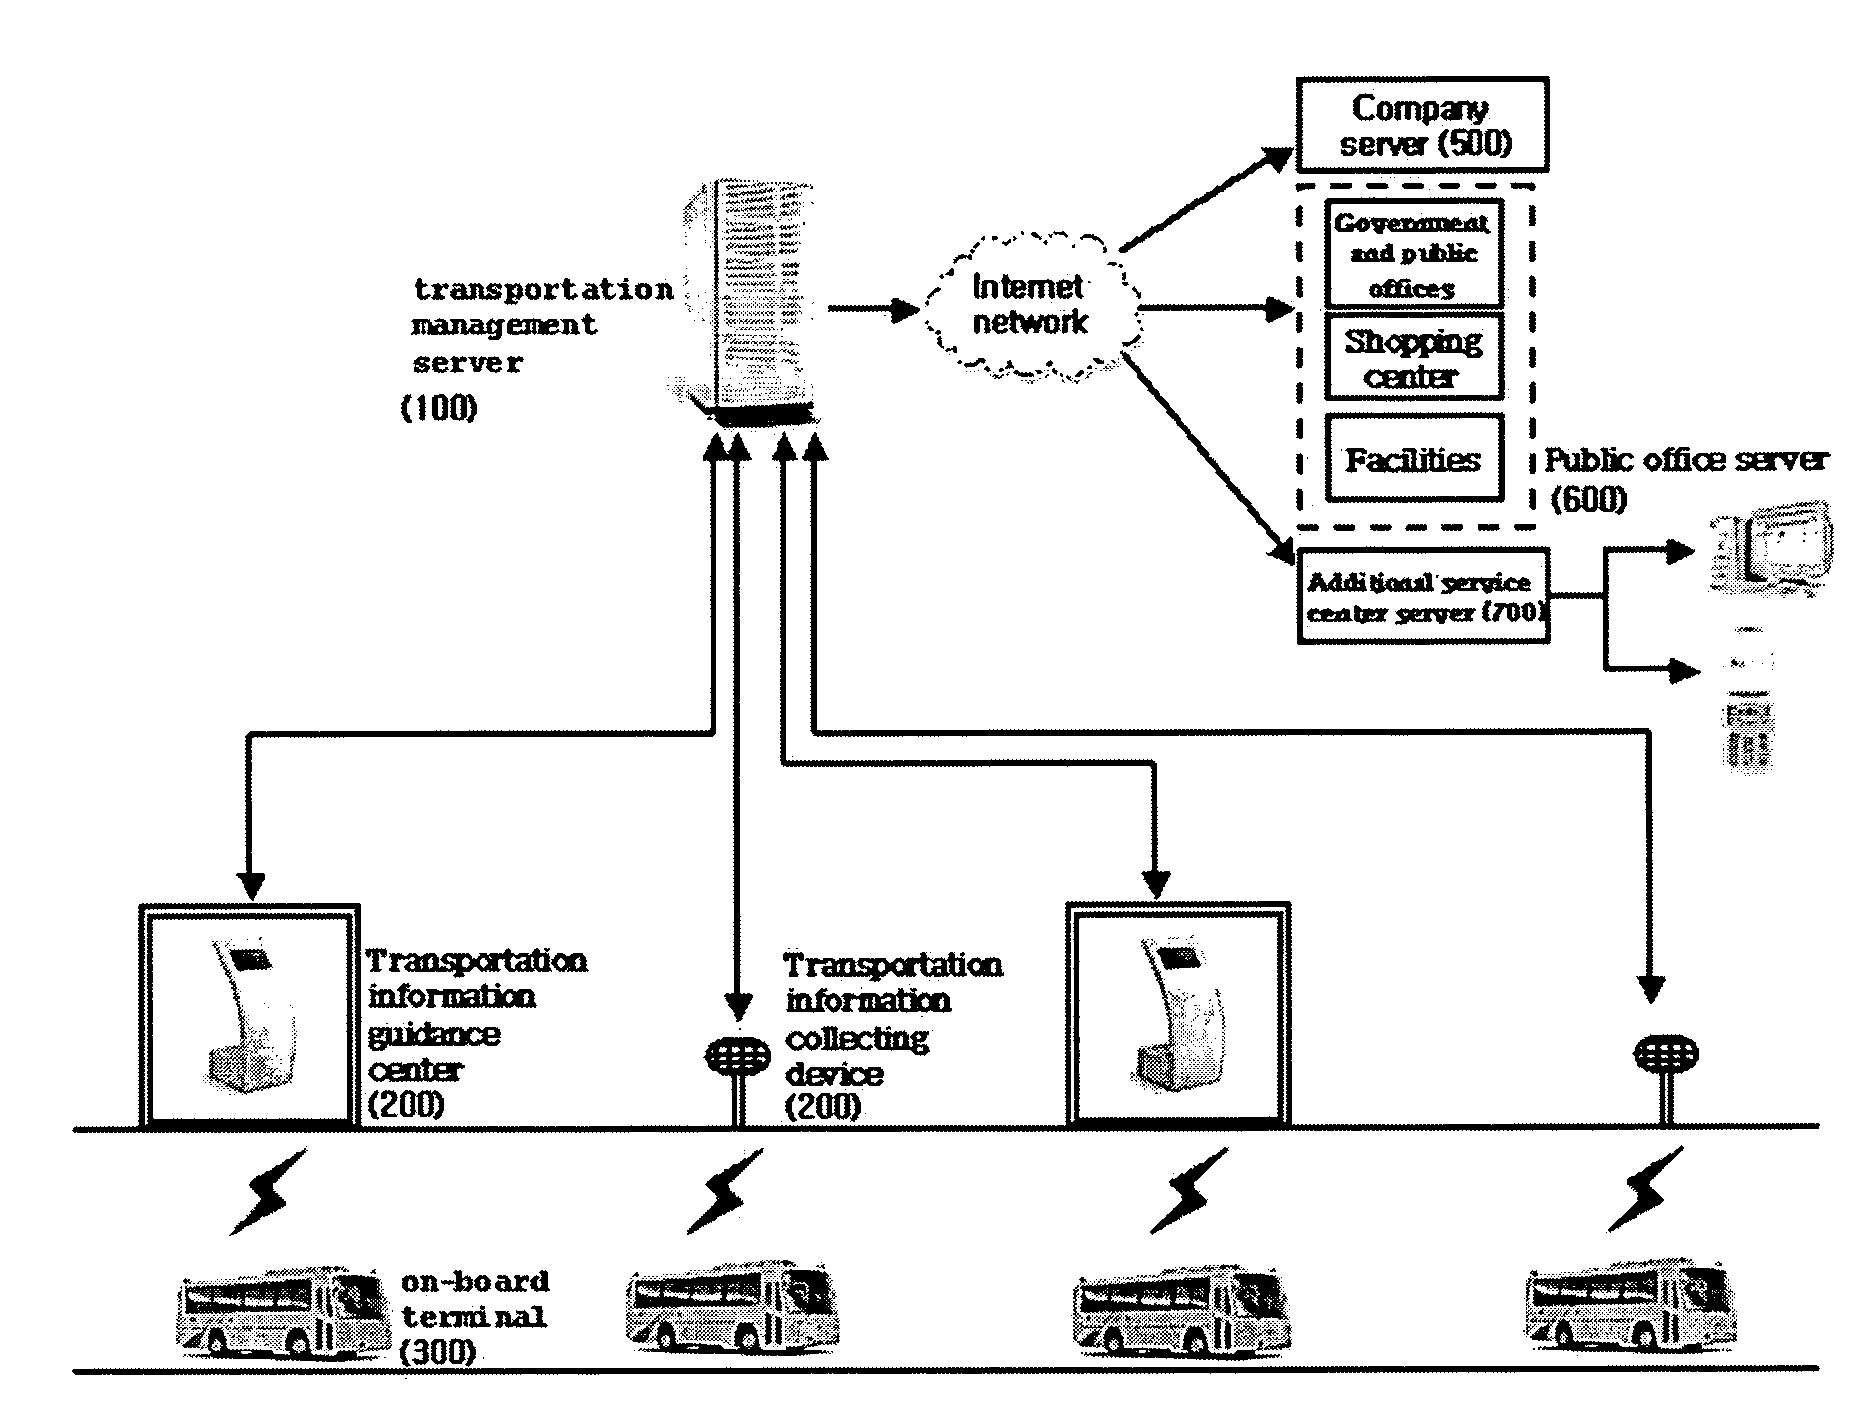 System and method for controlling public transportation